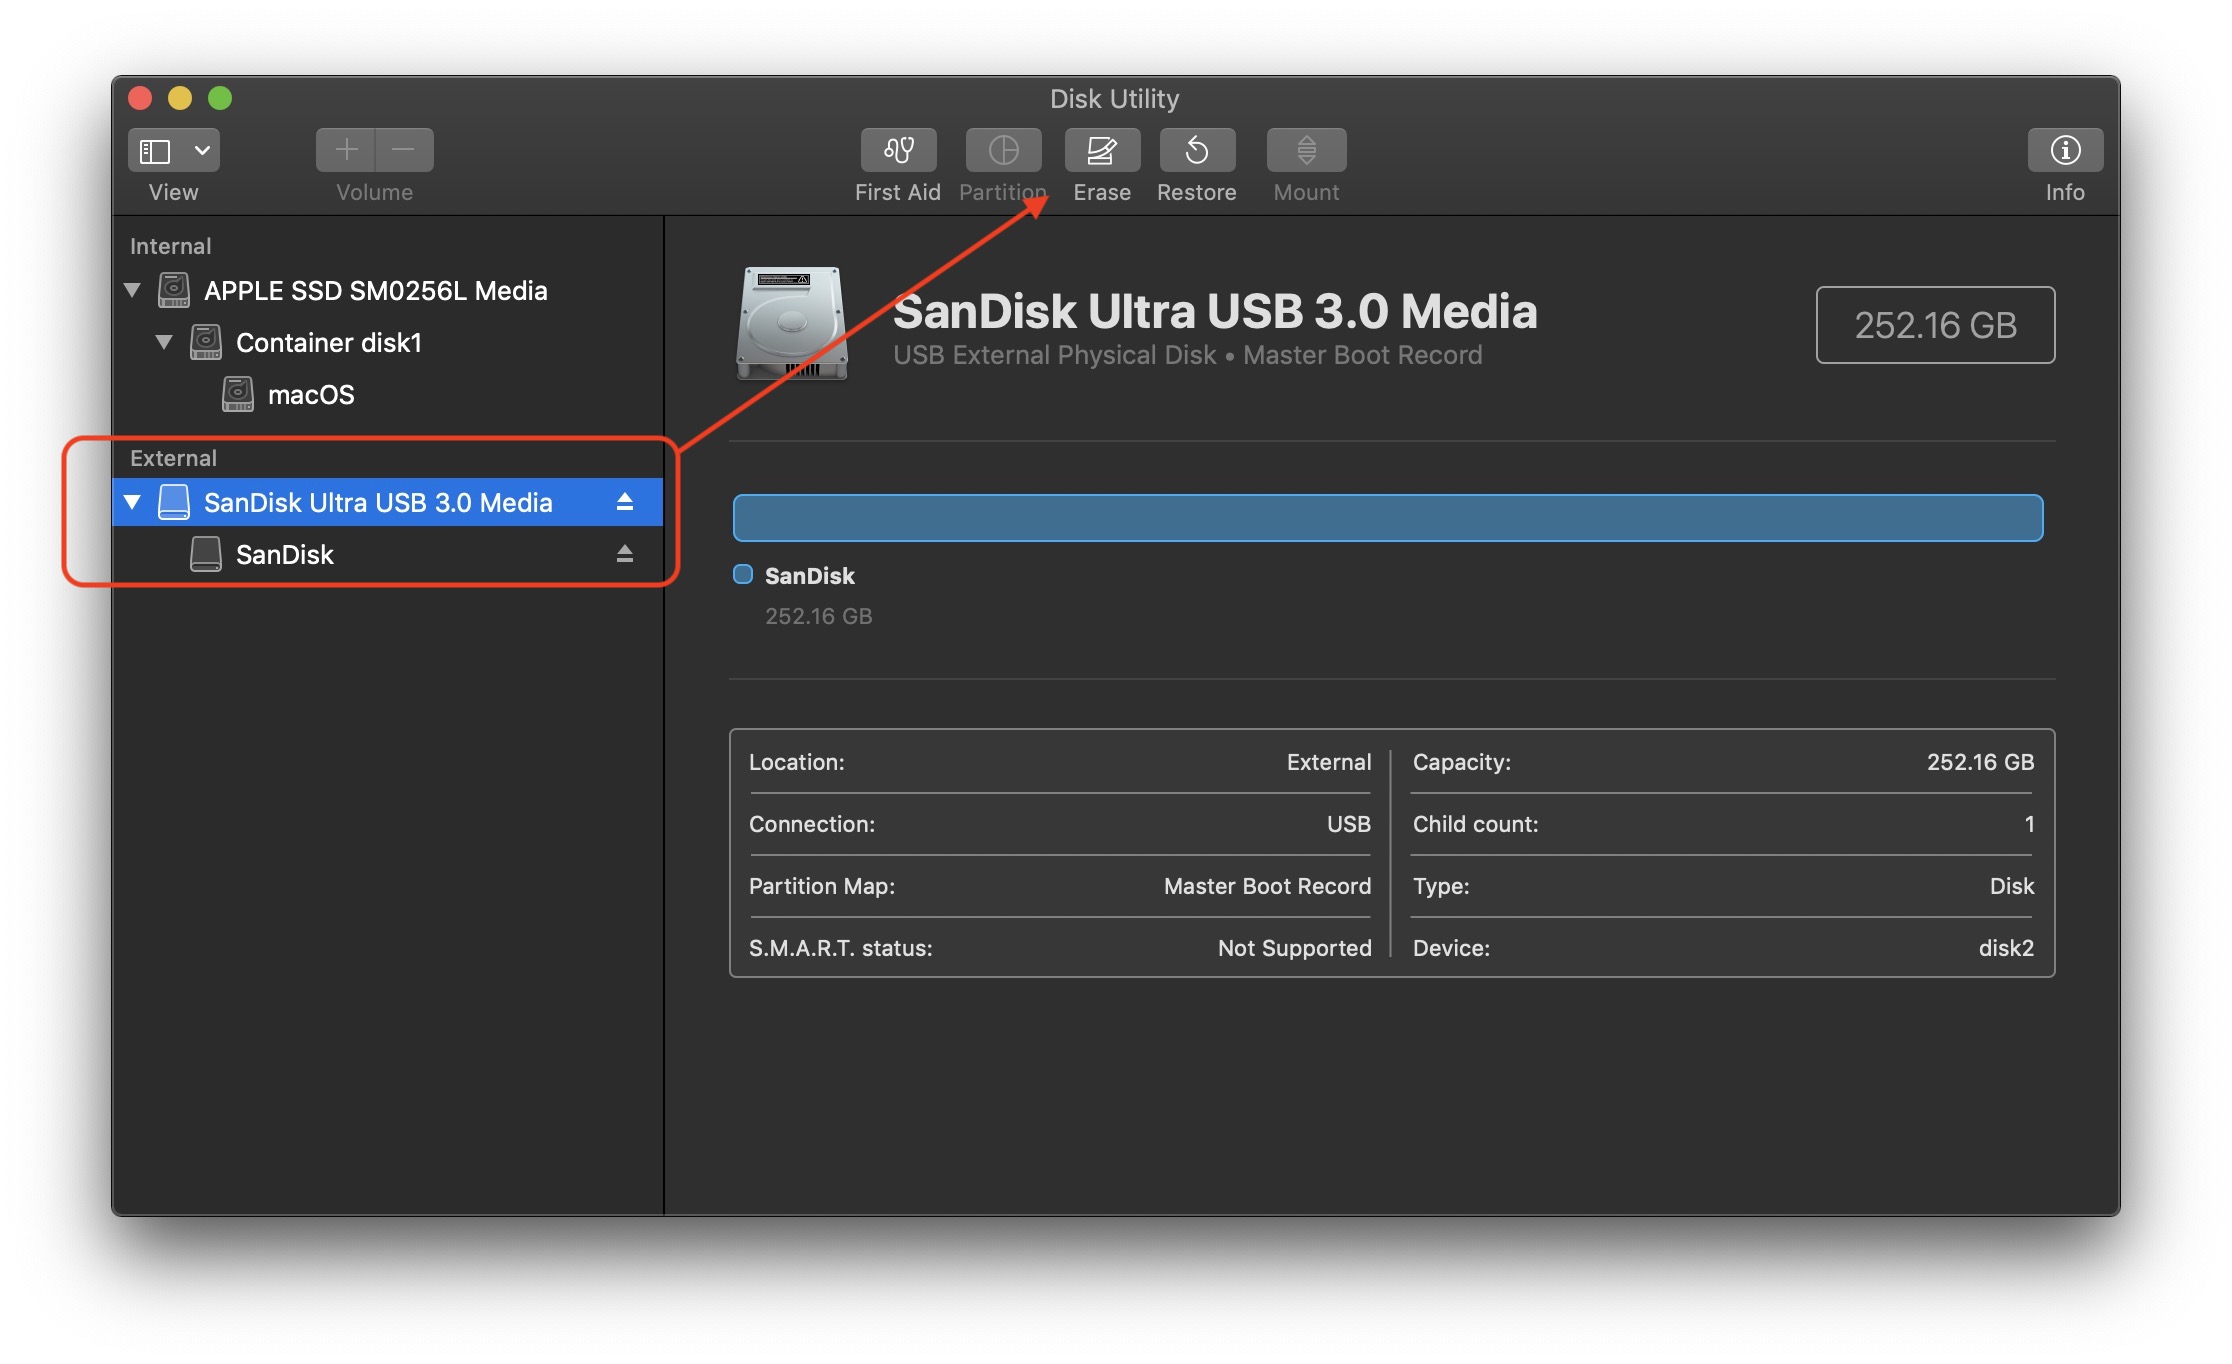 Select Flash Drive in Disk Utility